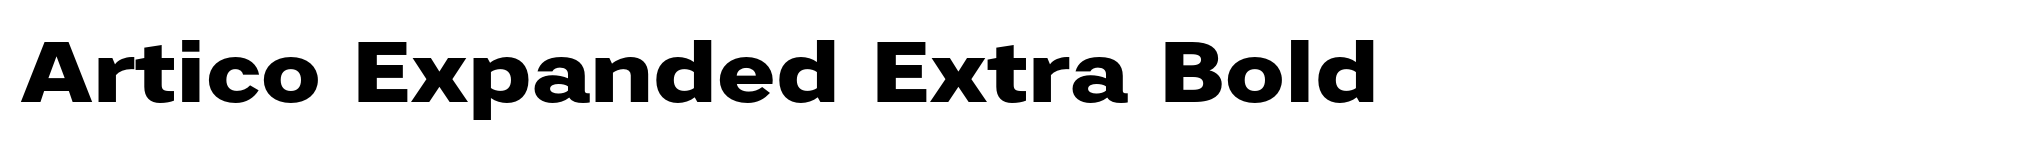 Artico Expanded Extra Bold image